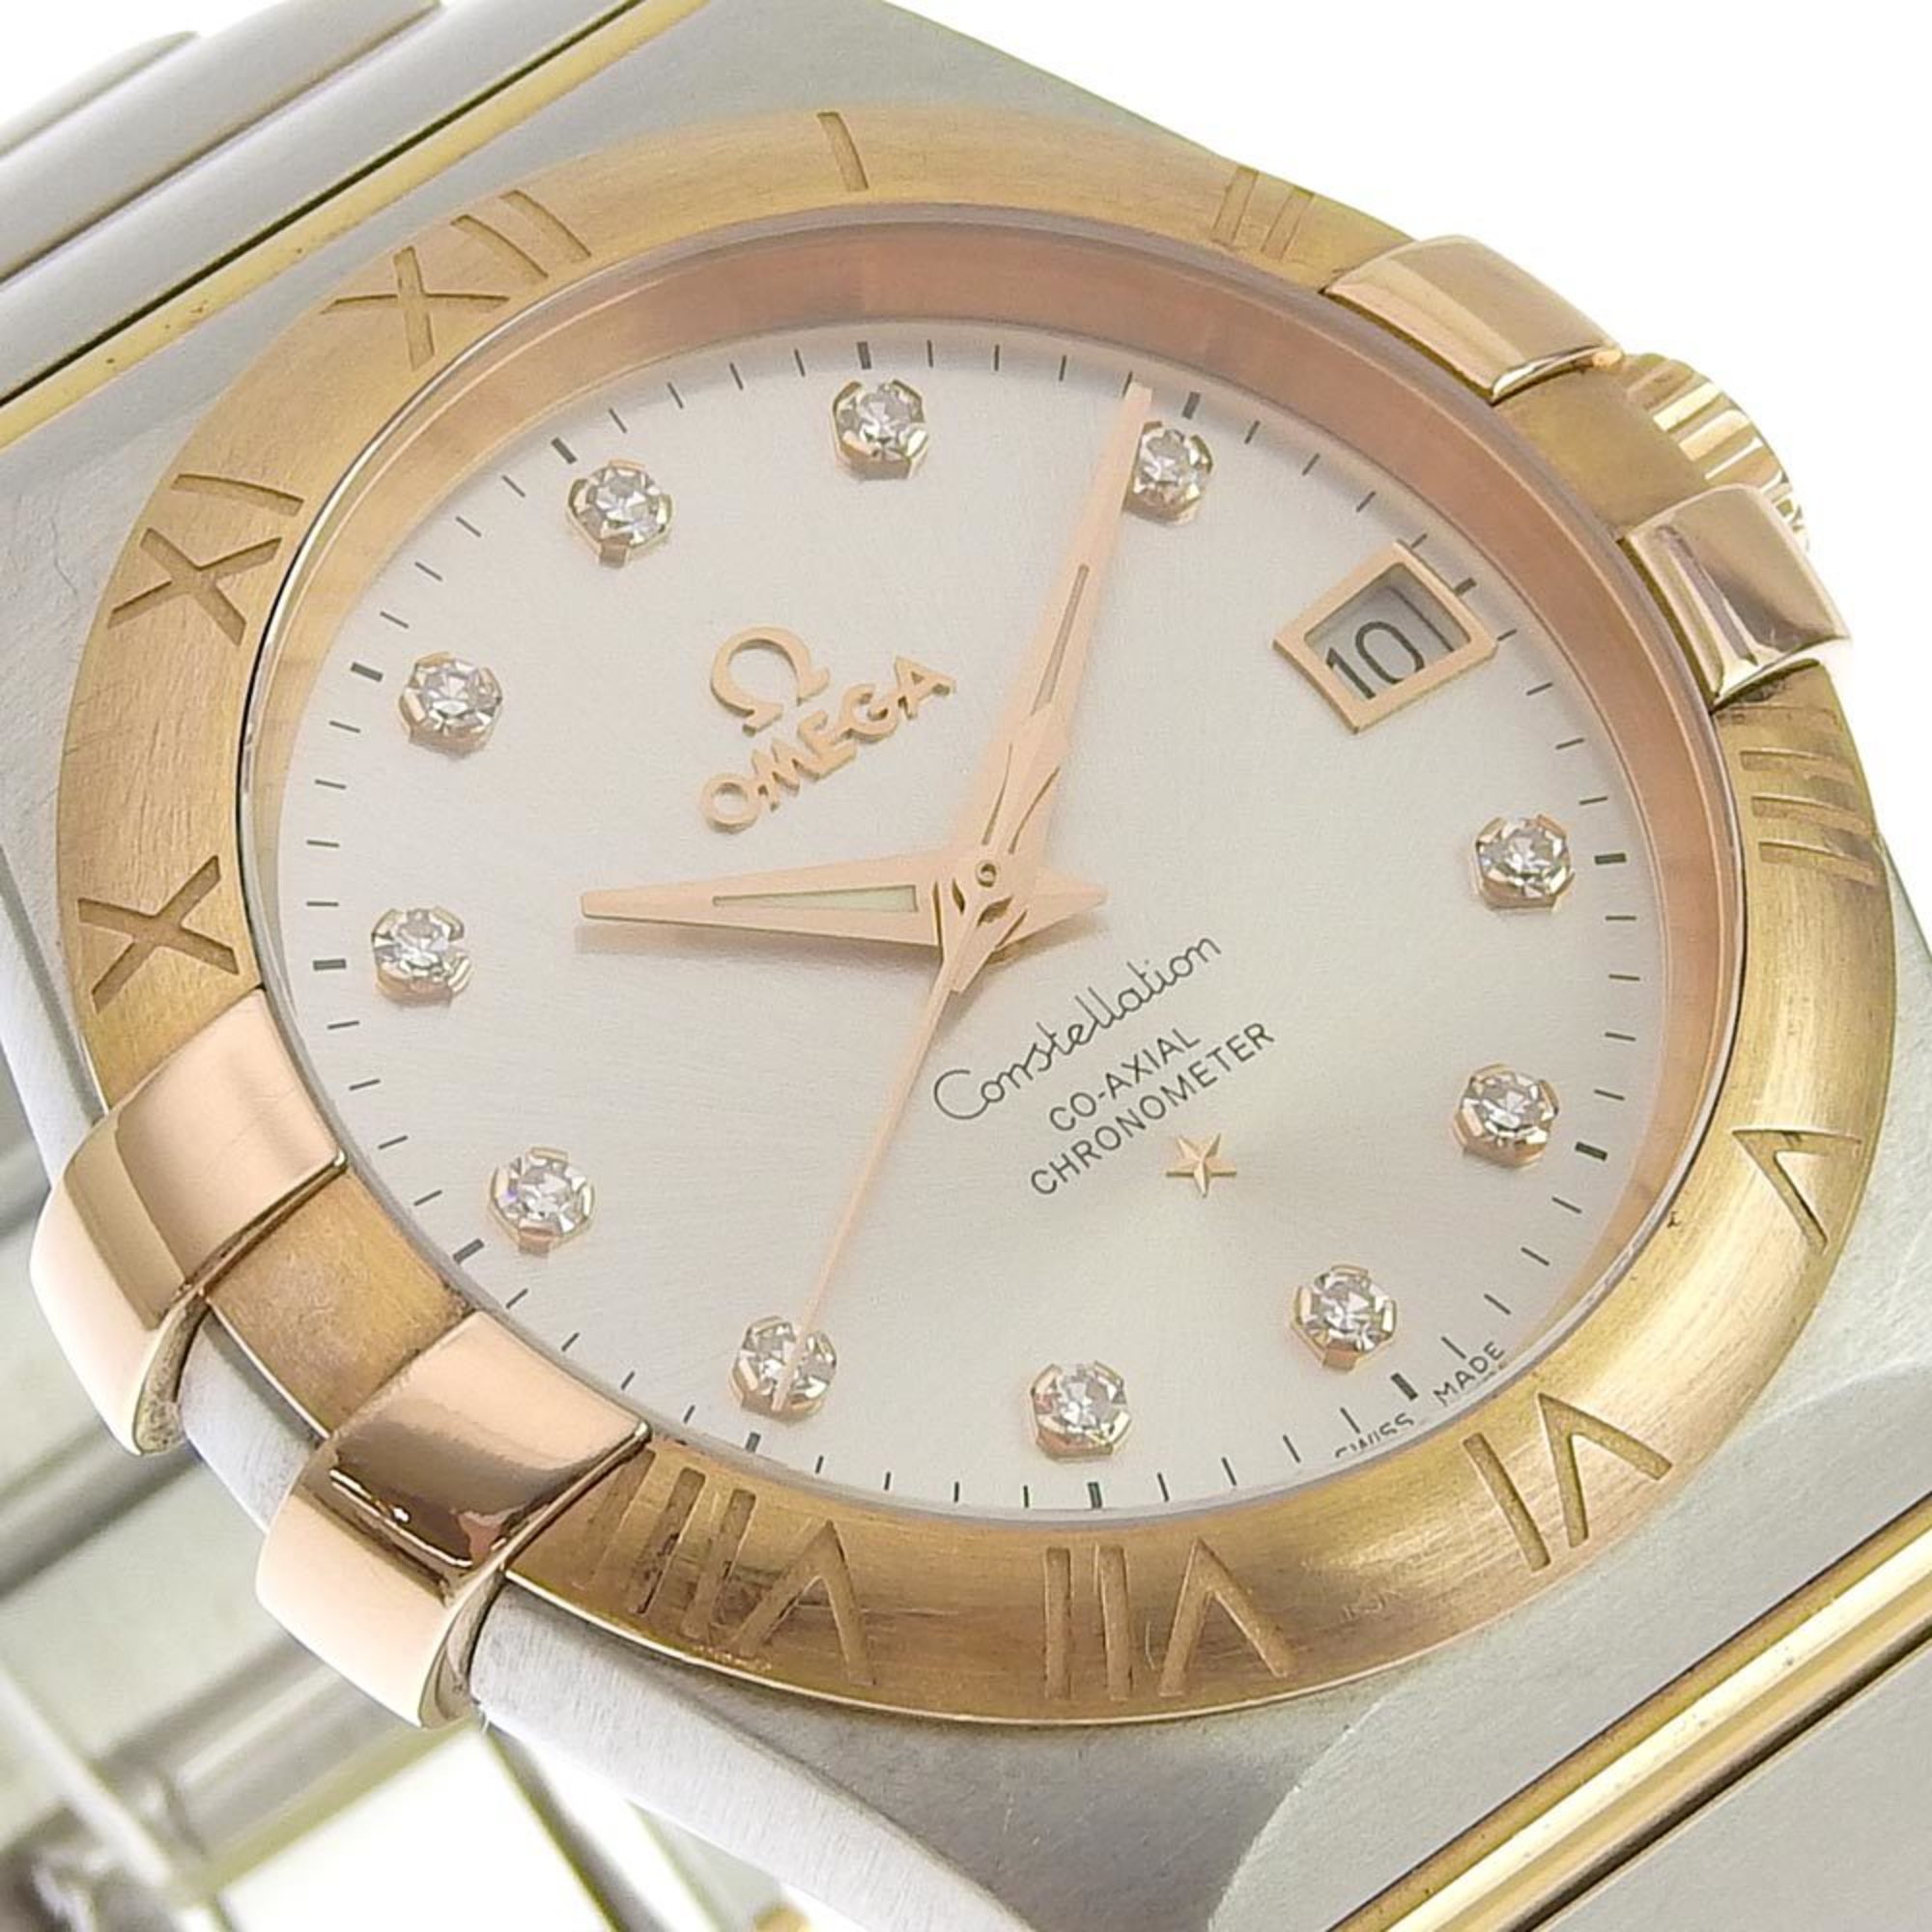 Omega OMEGA Constellation Watch 11P Diamond 123.20.35.20.52.001 Stainless Steel x K18 Pink Gold Automatic Winding Analog Display Silver Dial Men's